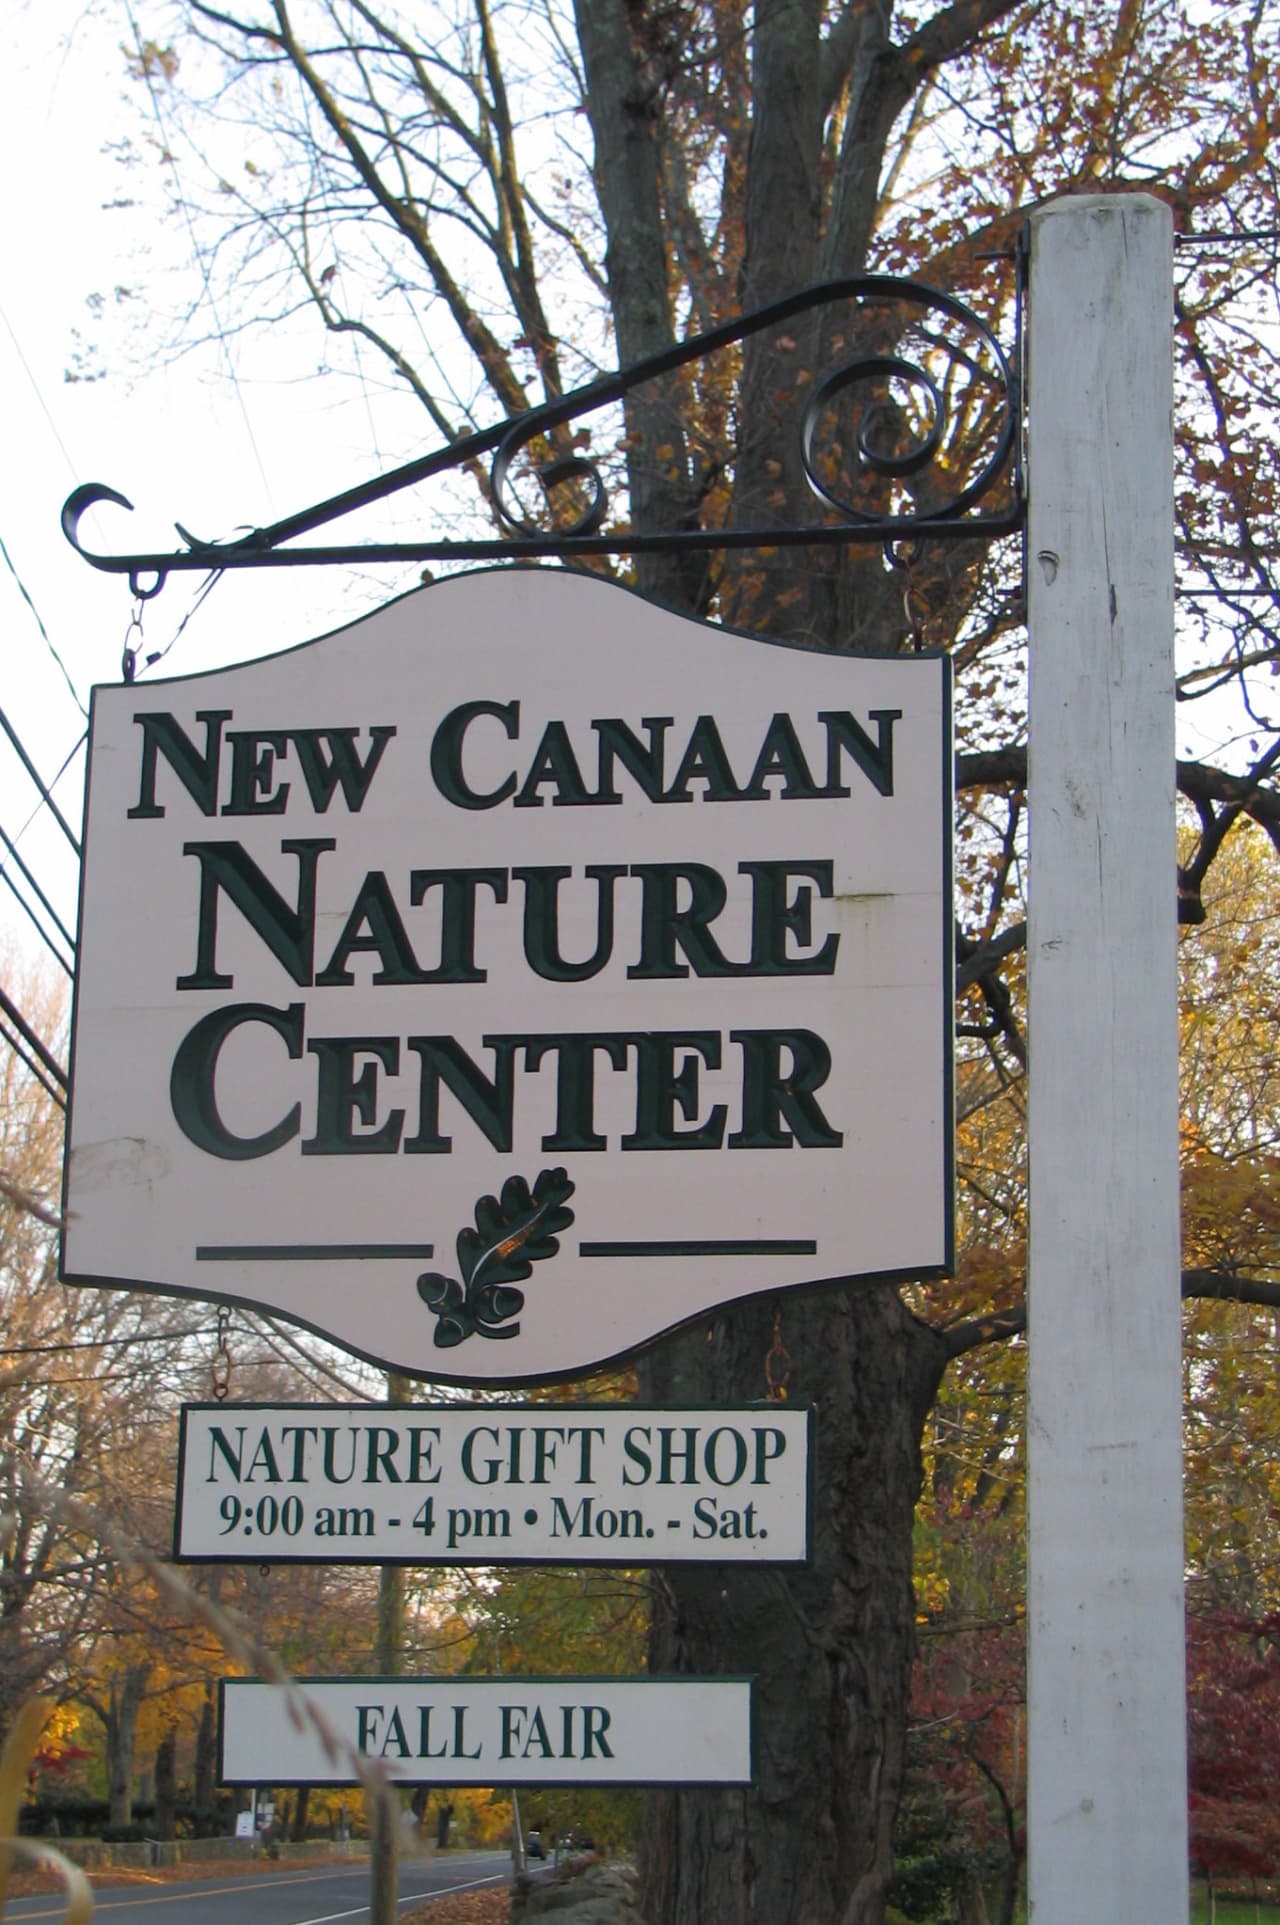 Visit the New Canaan Nature Center for preschool open house on Tuesday.